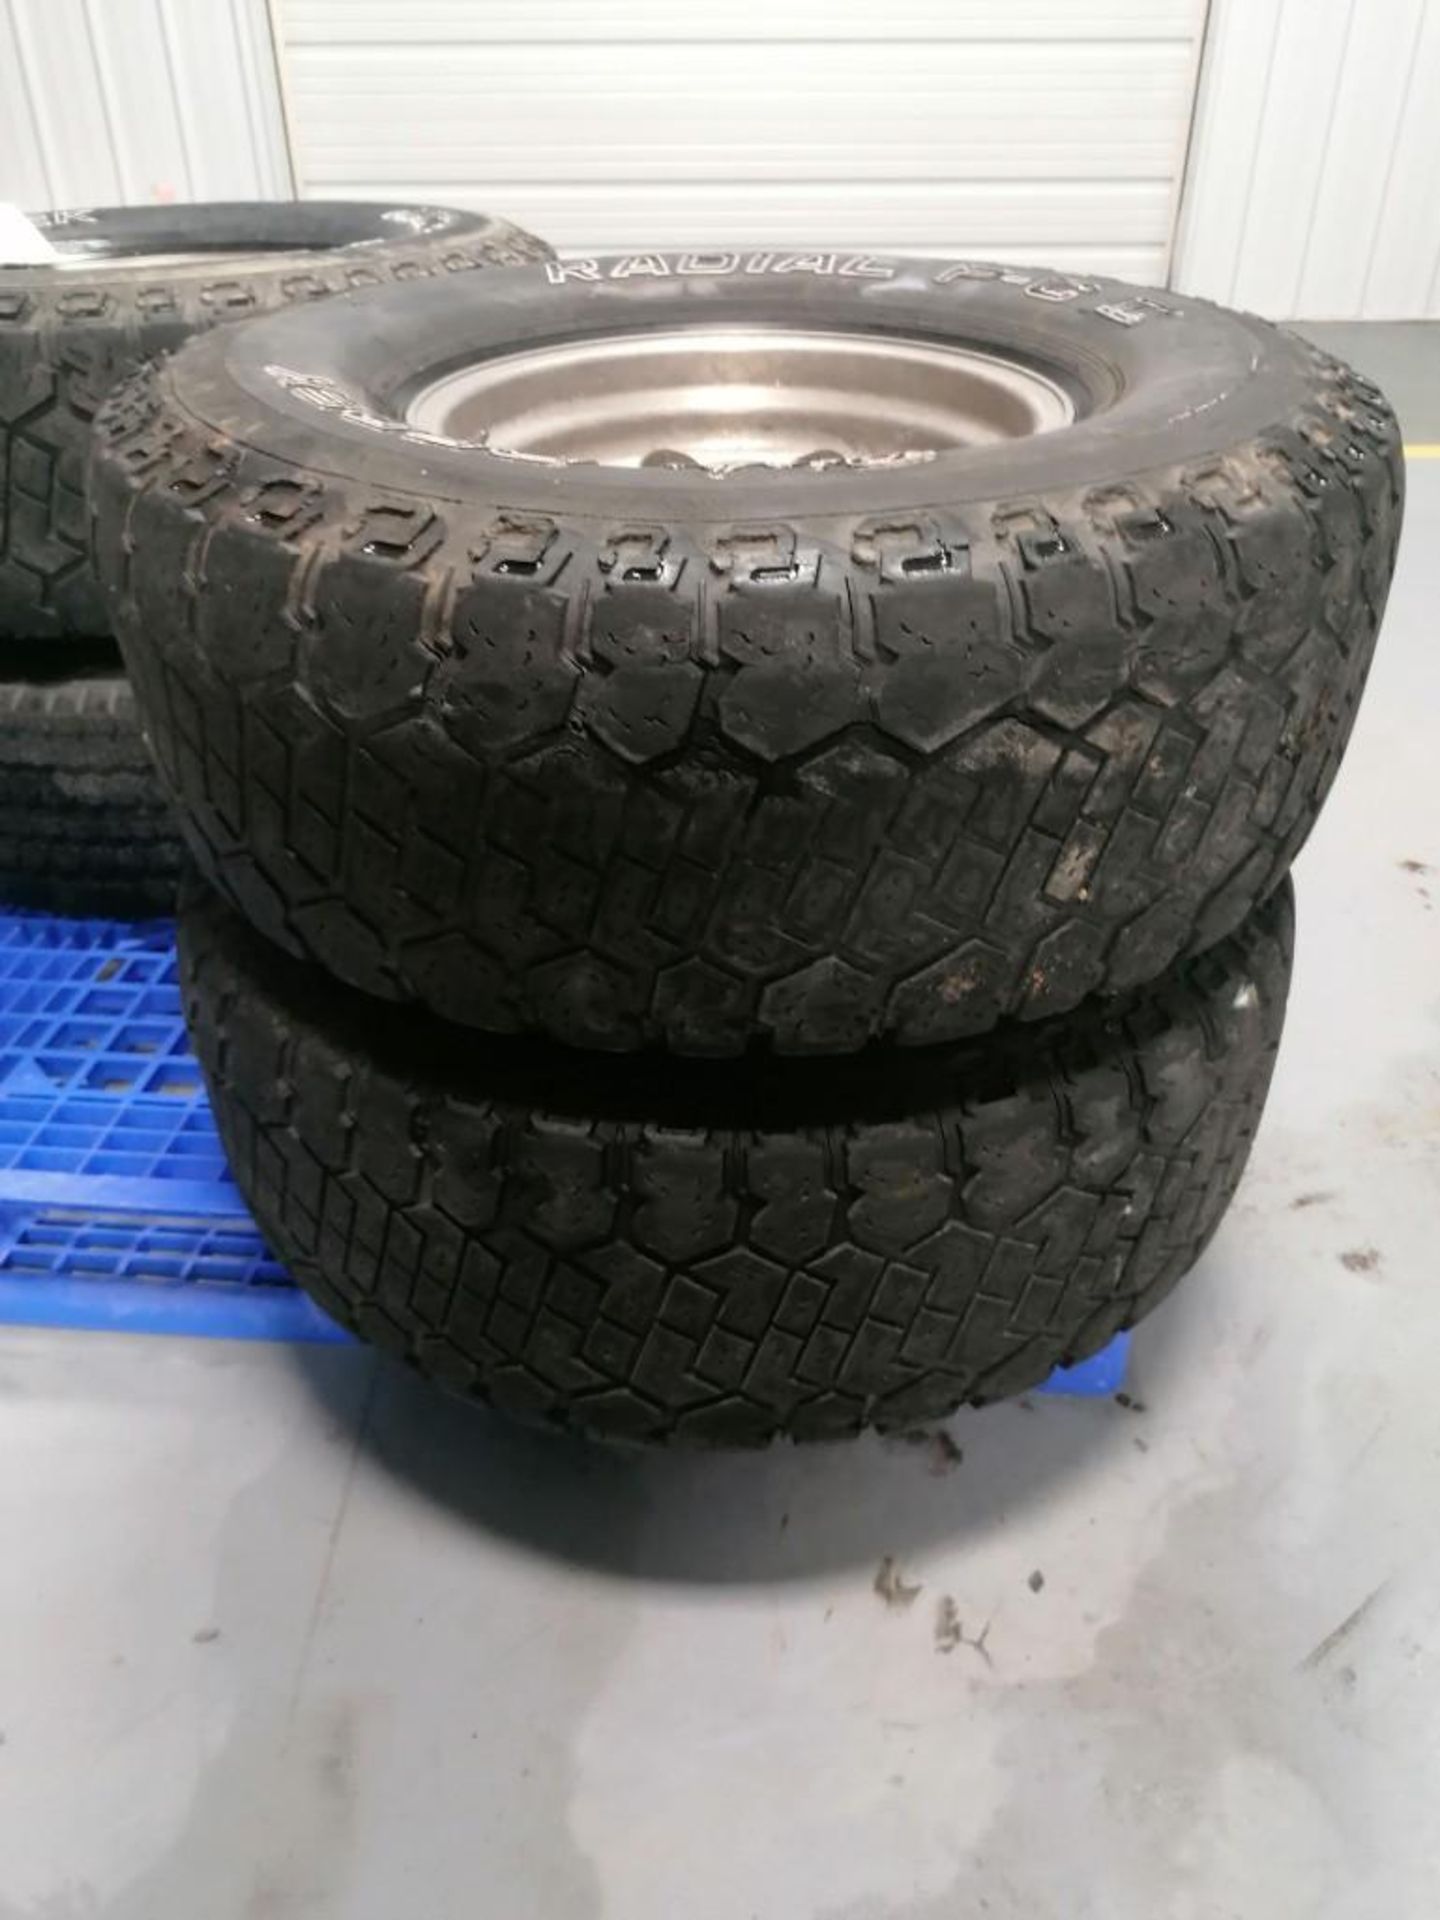 (4) Dick CEPEX Radial F-C II LT315 / 75 R16 Tires with 8 Hole Pattern Rims. Located in Mt. Pleasant, - Image 8 of 10